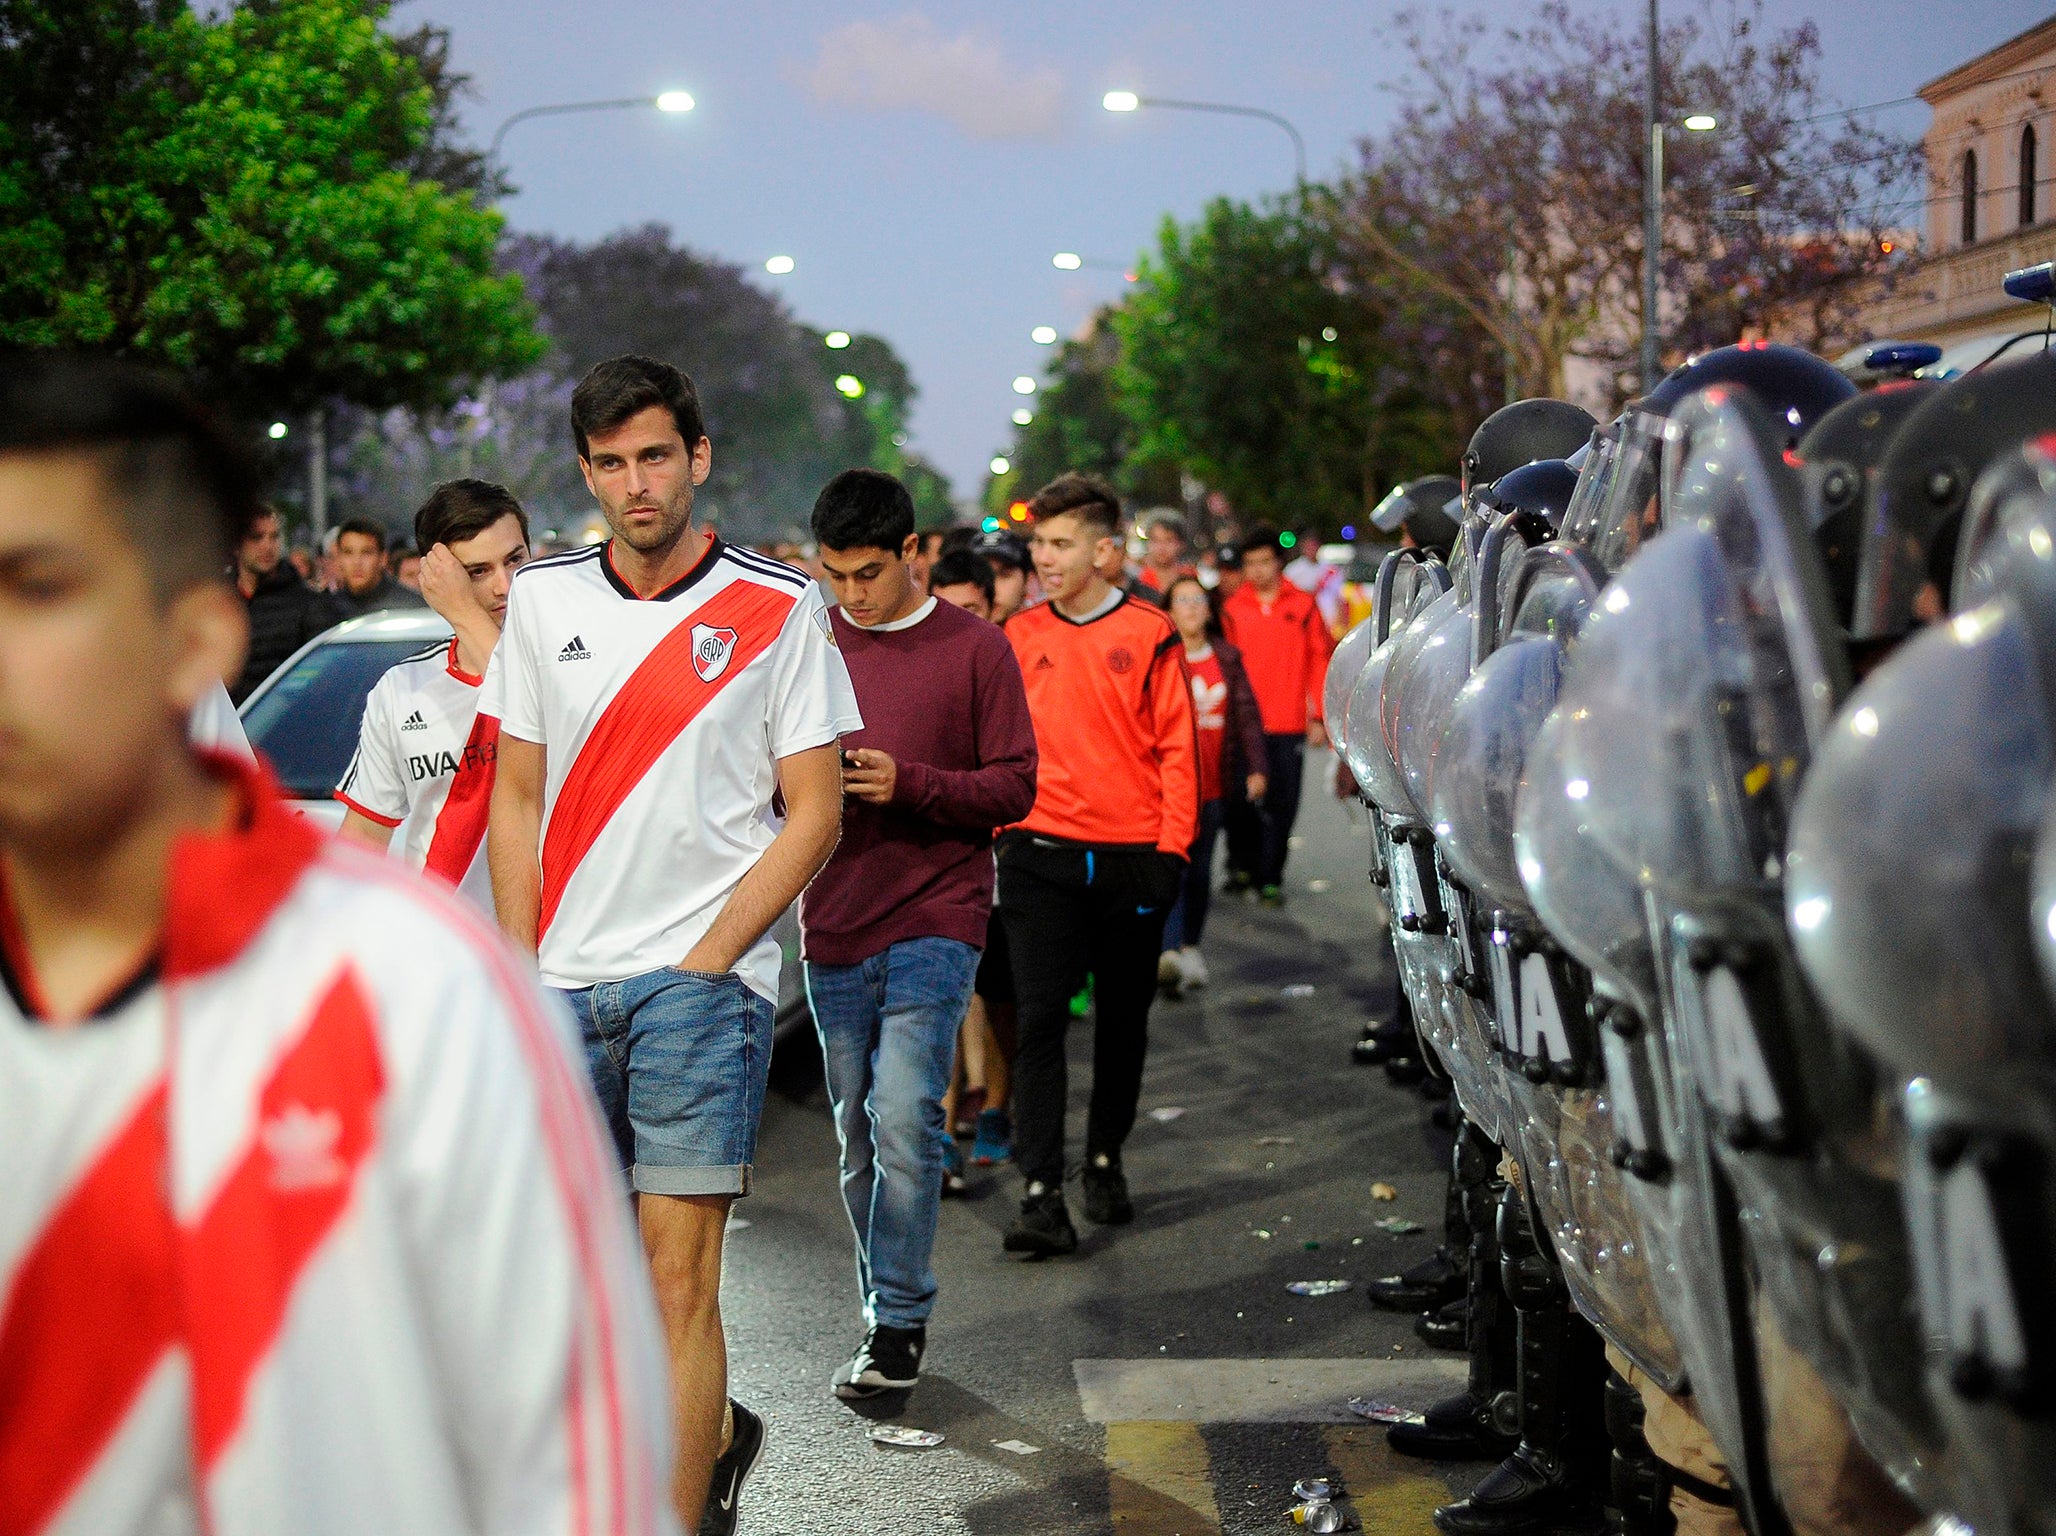 Supporters of River leave the Monumental stadium in Buenos Aires after authorities postponed the match